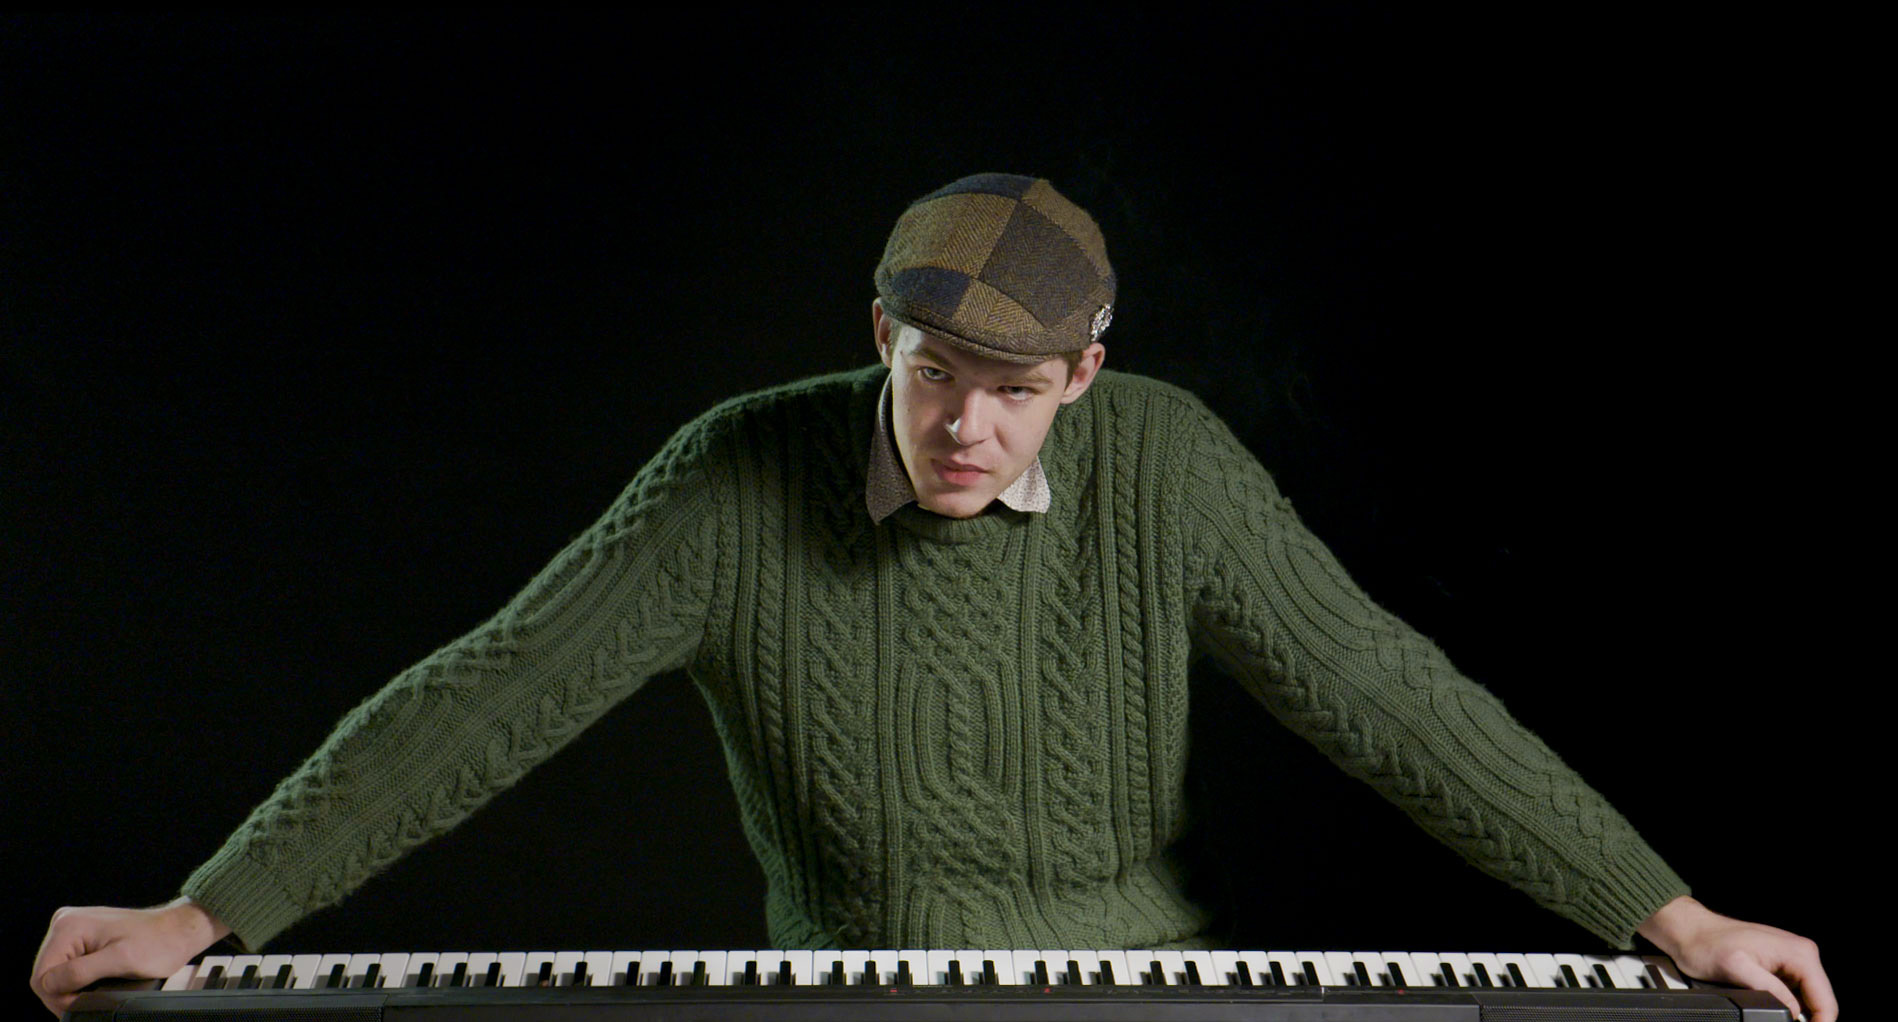 Sean, standing arms wide over a piano keyboard, wearing a flat cap, looking at the camera.